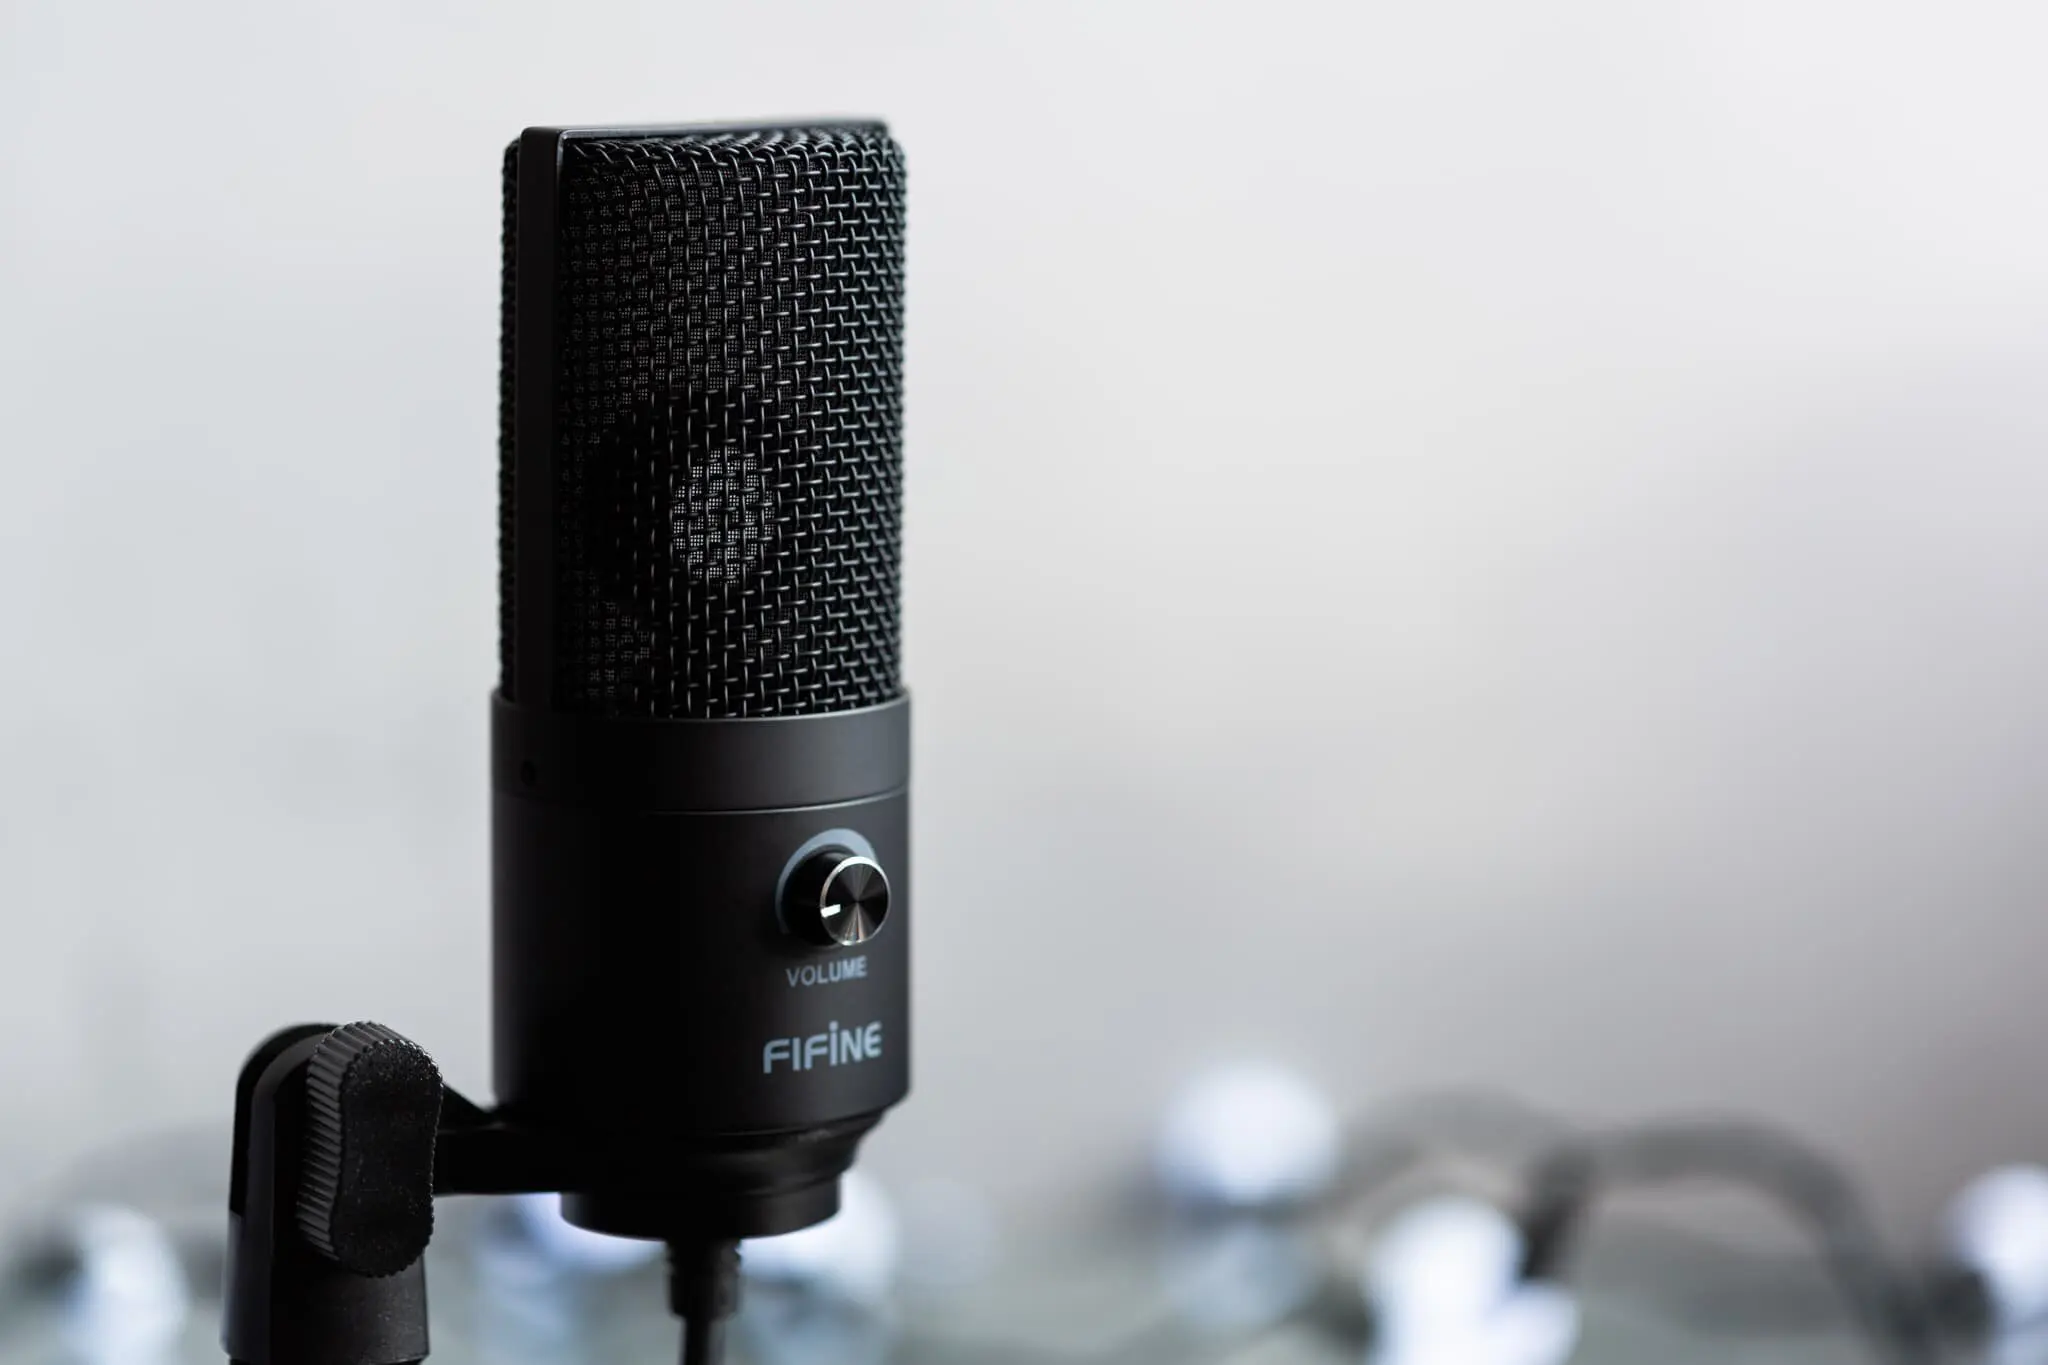 What is the best cheap USB microphone for recording rap vocals at